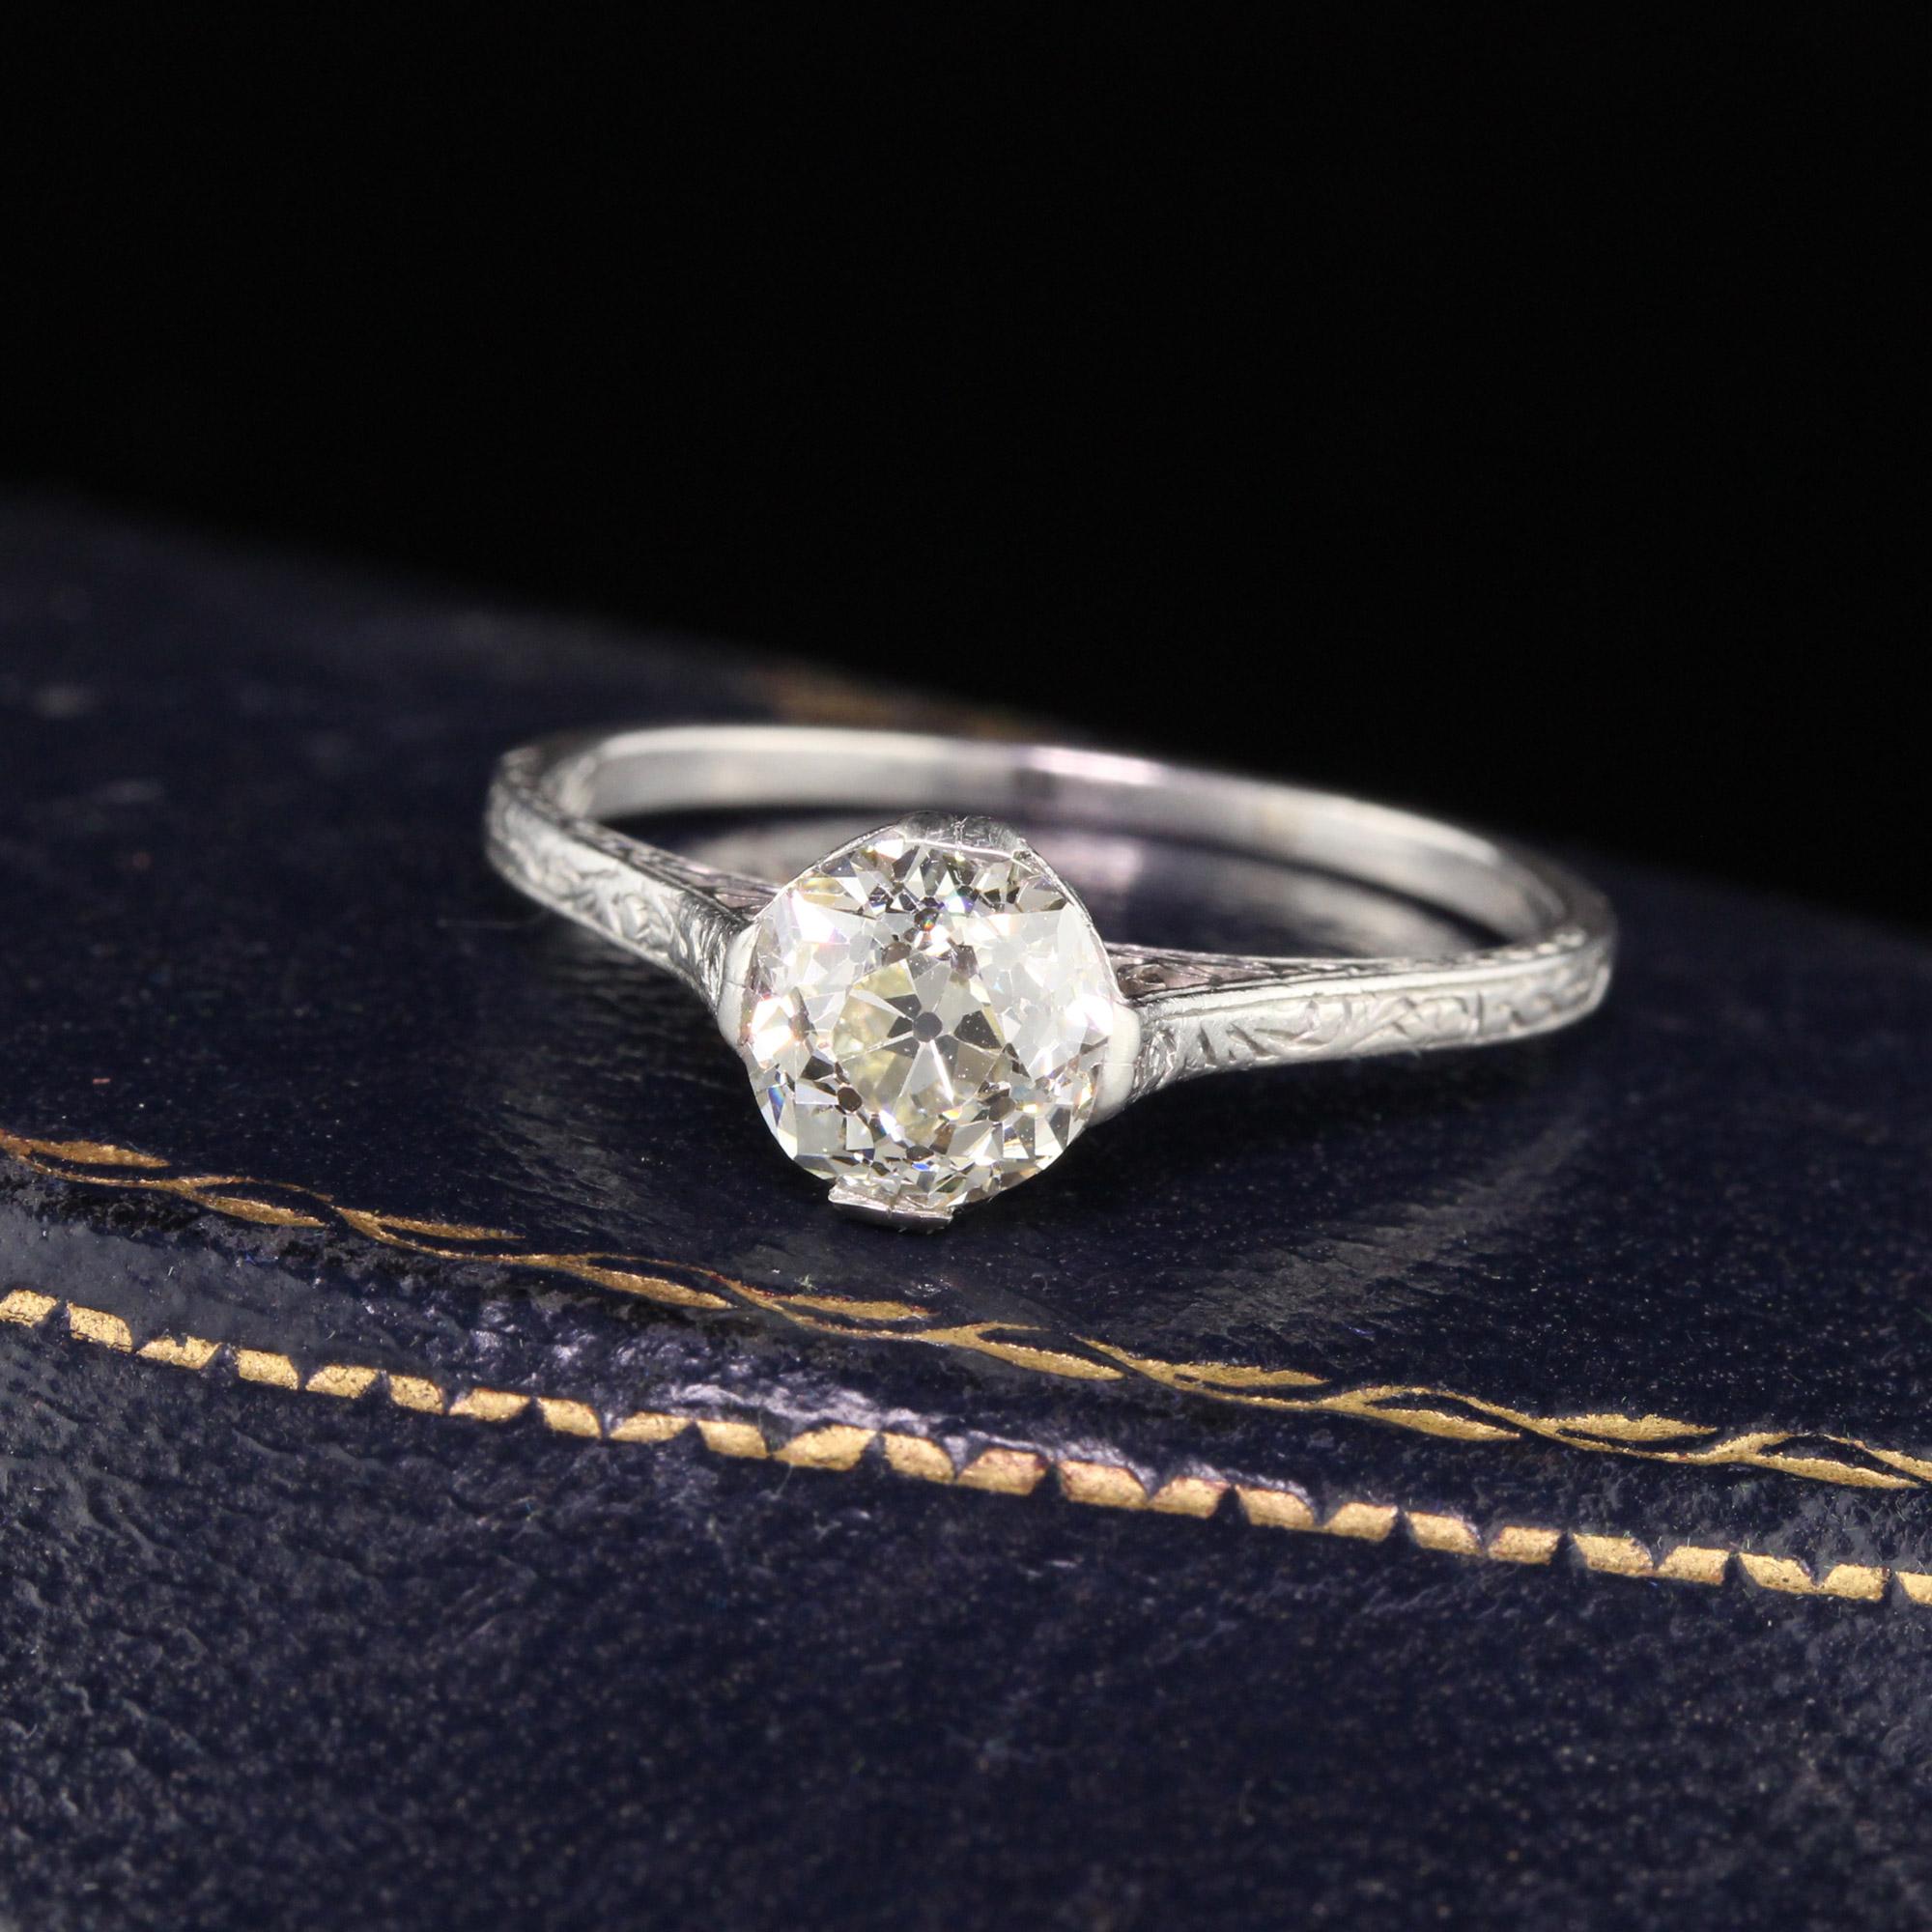 Magnificent Edwardian solitaire engagement ring in platinum featuring a 1.17 ct old european cut center diamond. Beautiful engraving and filigree work on the sides. This ring is in excellent condition.

#R0289

Metal: Platinum

Weight: 3.1